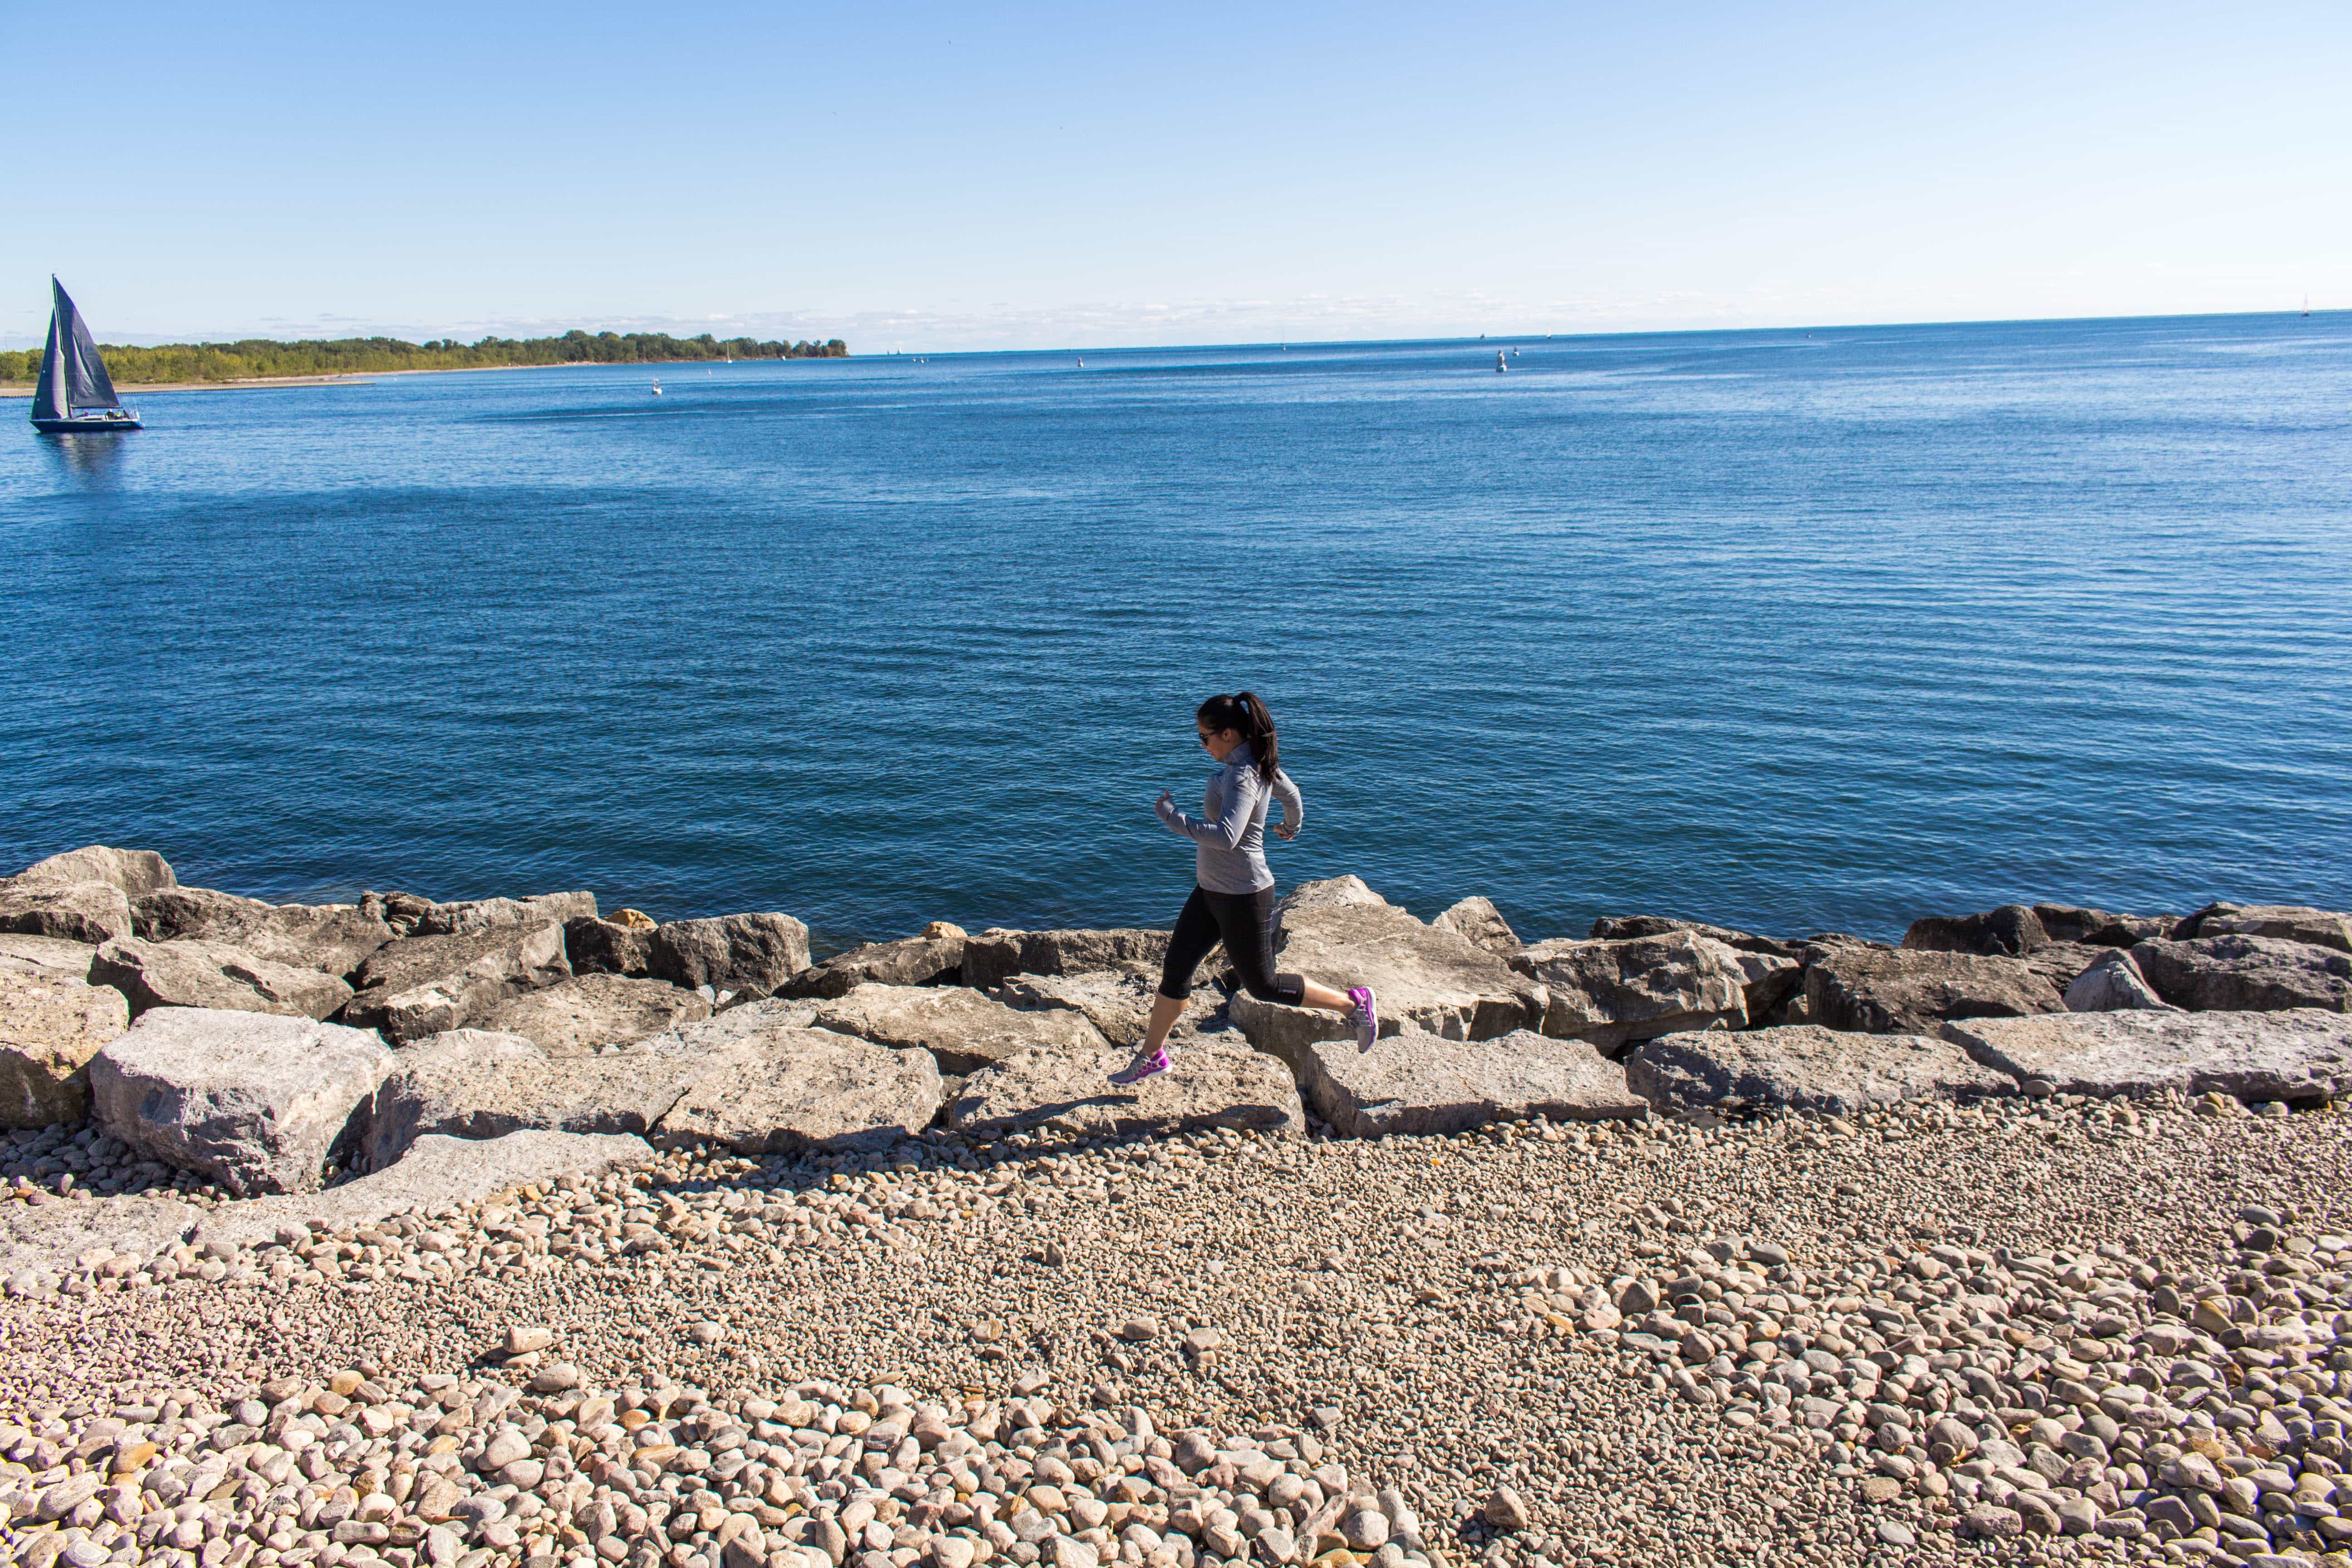 Are you a runner heading to Toronto? Here are a couple scenic places to run on your next trip to Toronto!